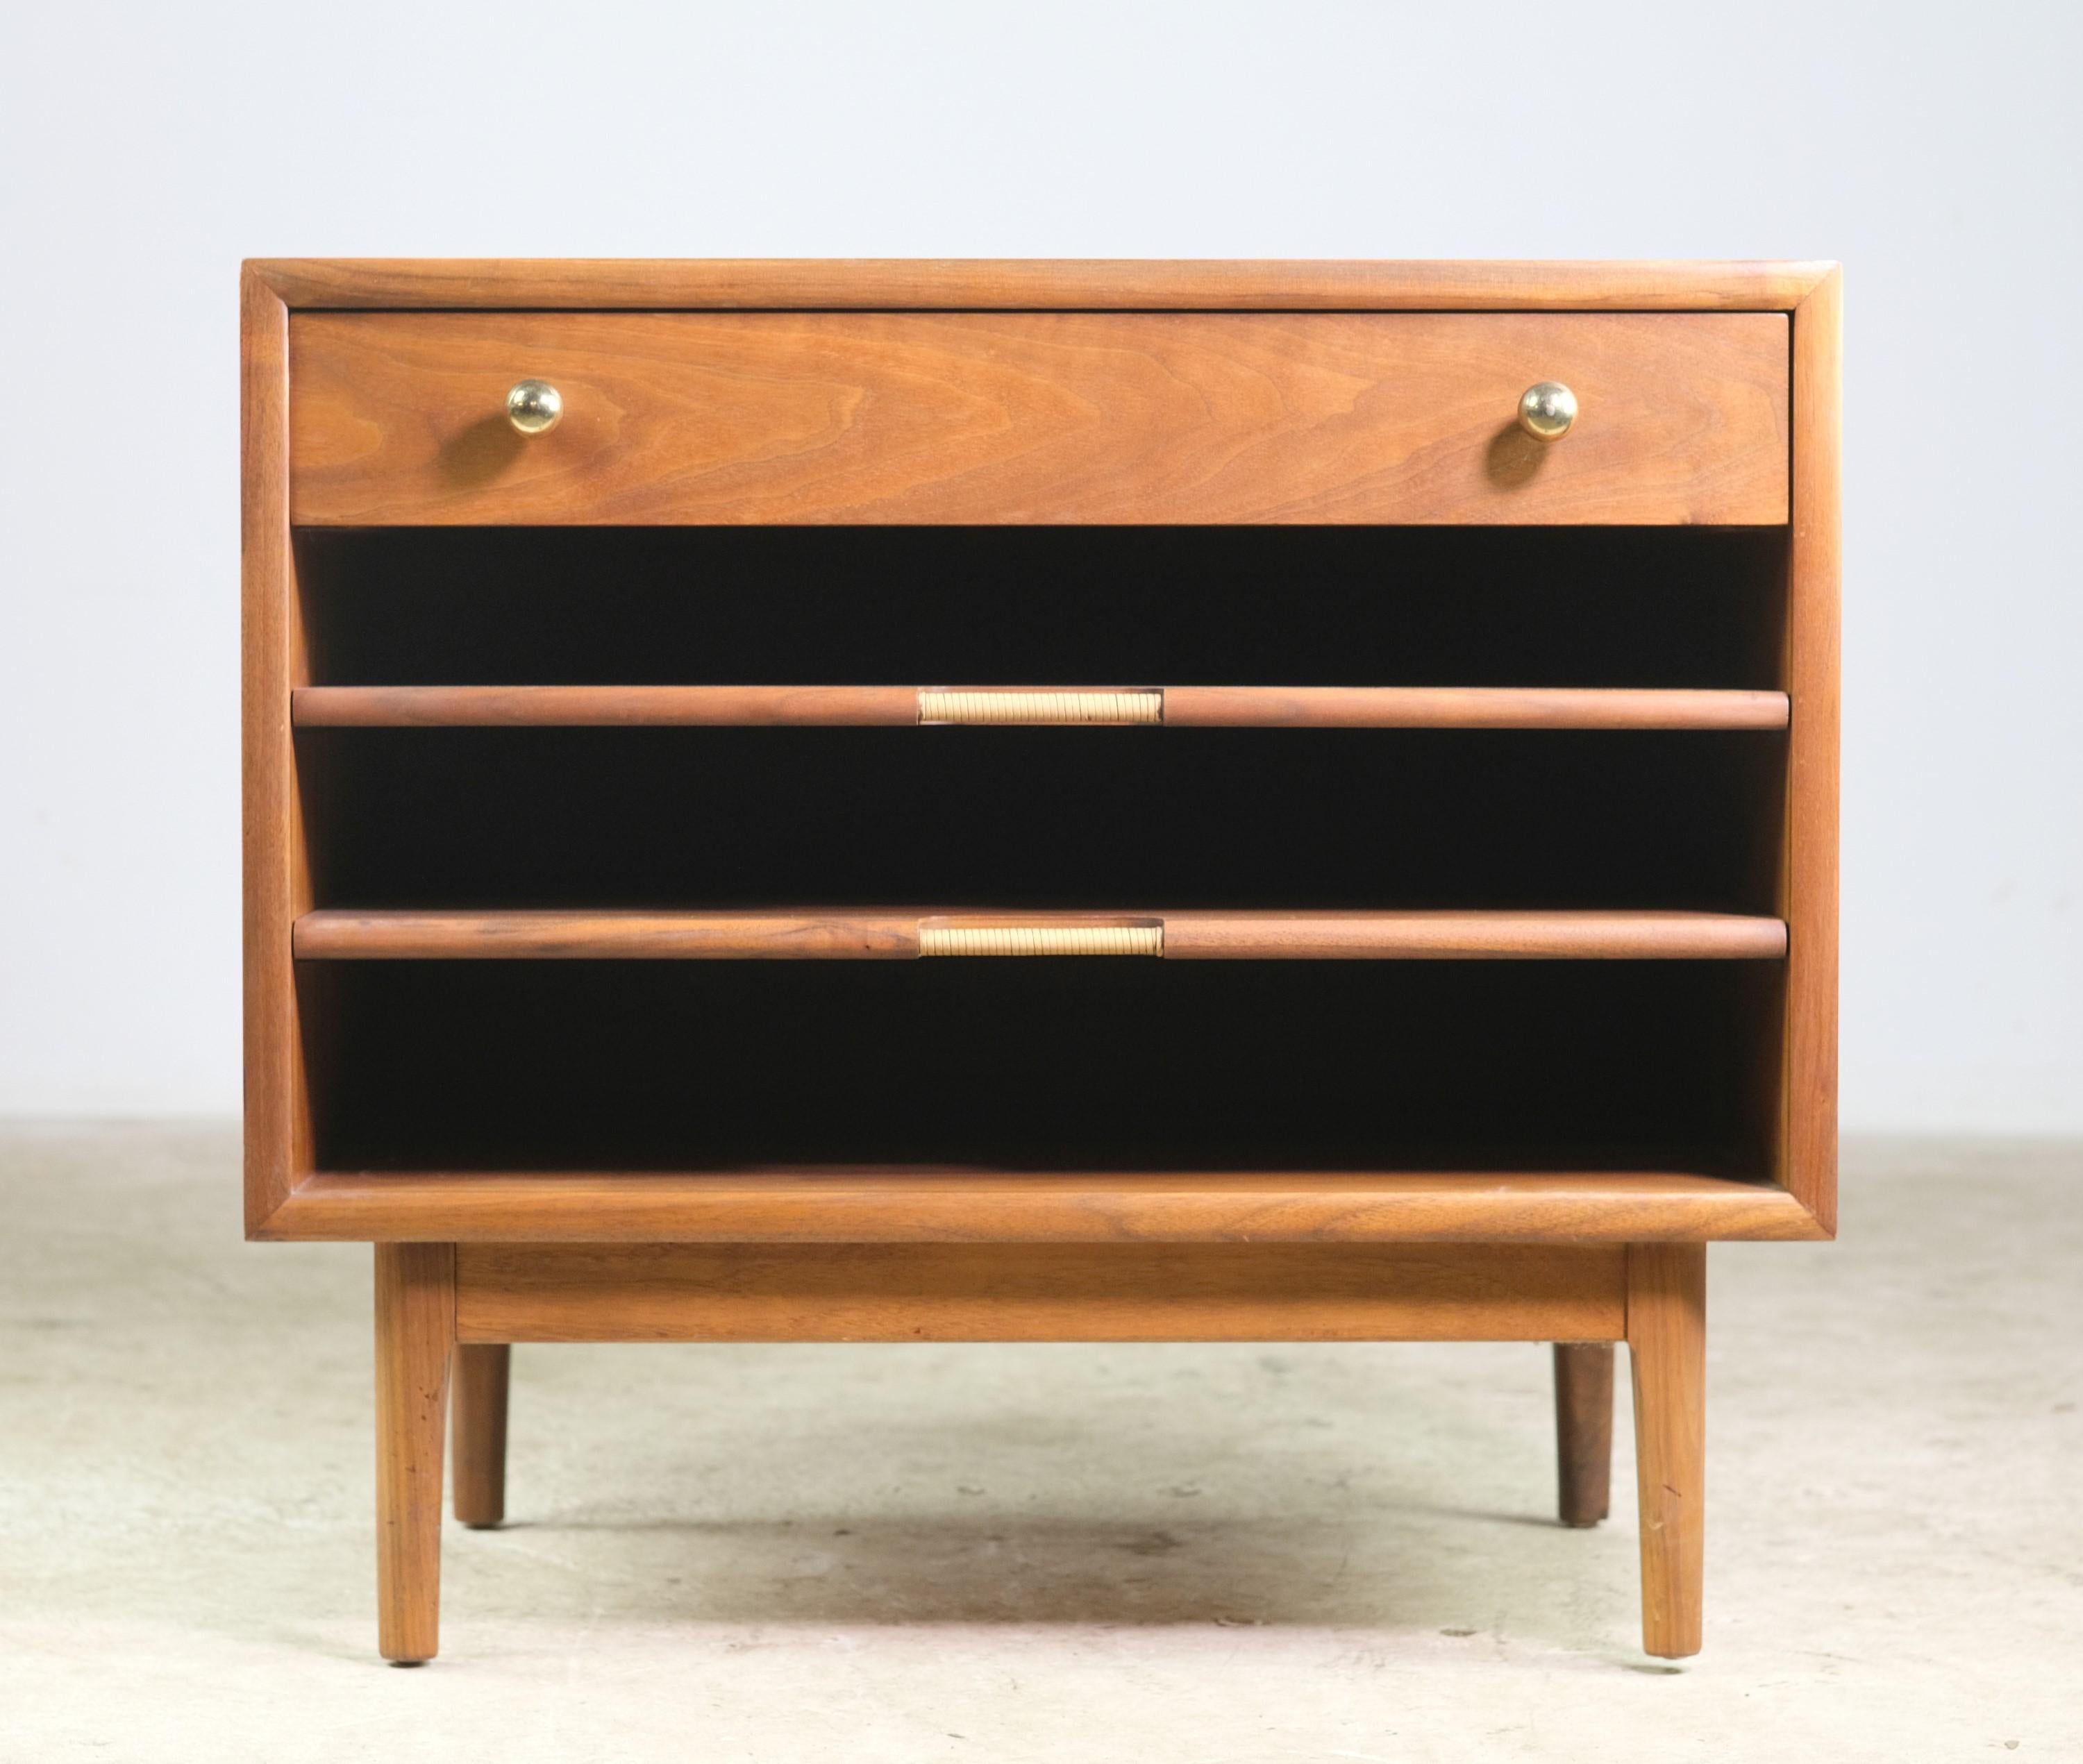 Made by Drexel, Mid-Century Modern walnut end table with one drawer and two shelves. The drawer has the original brass knobs and below are the two slide shelves. There is some worn finish on top & a small veneer chip on corner. Please see the